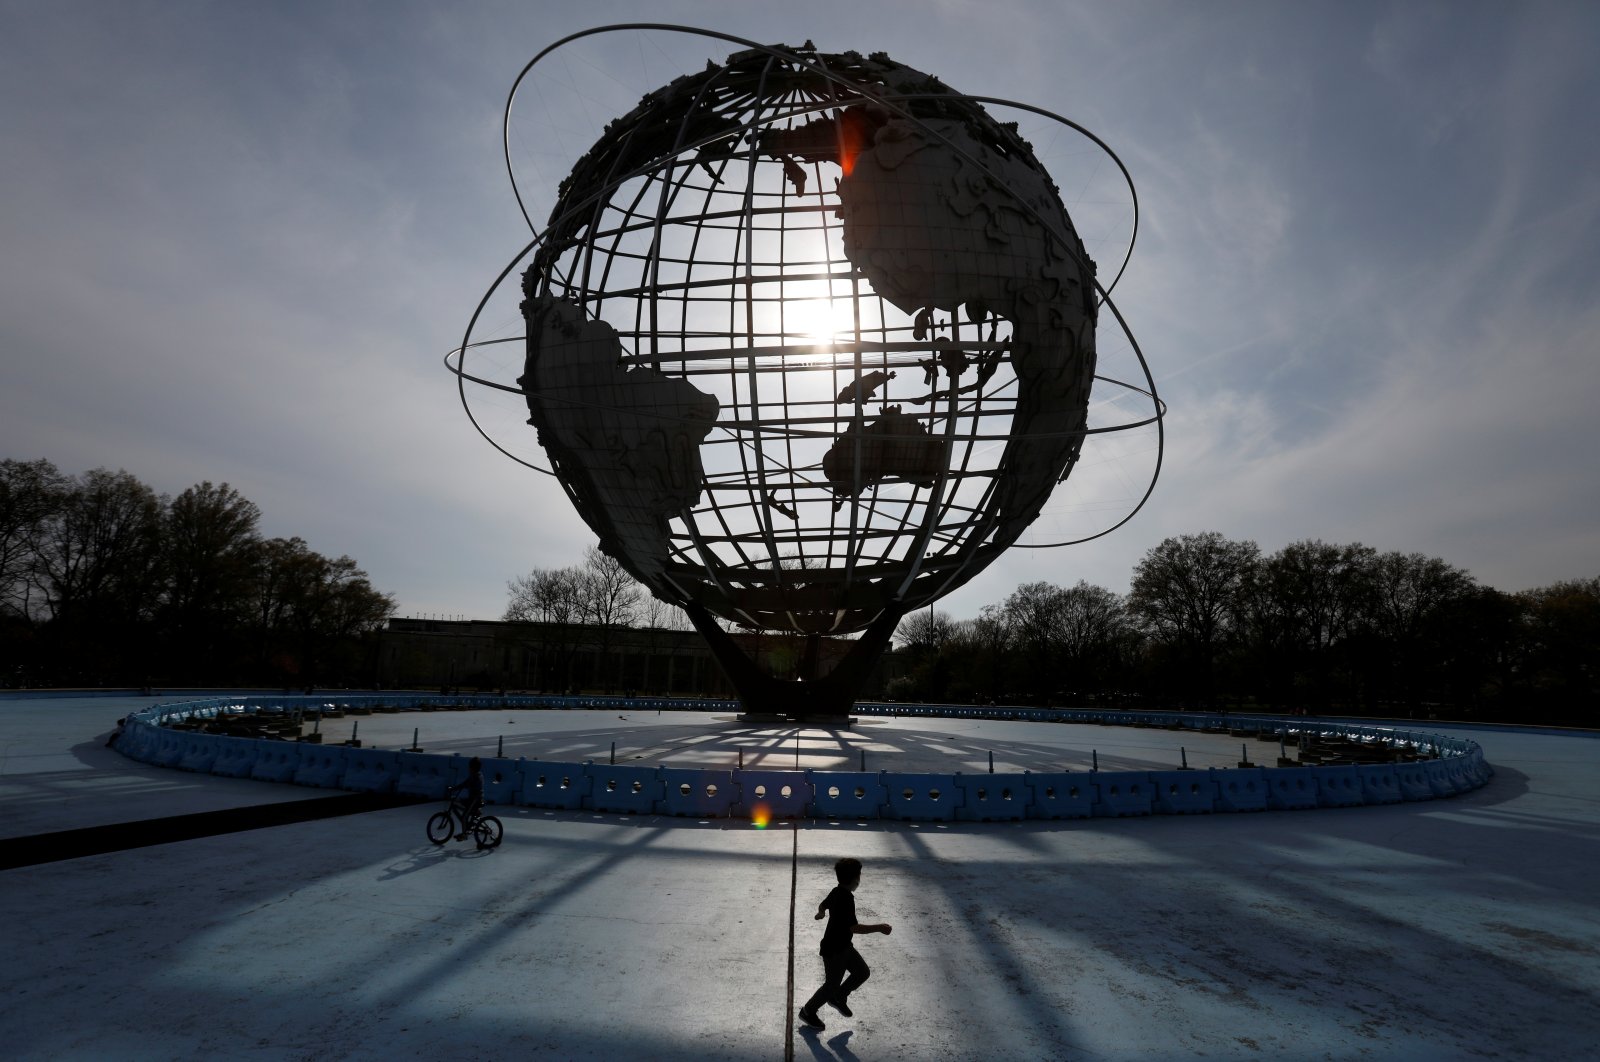 A child plays under "The Unisphere" in Flushing Meadows-Corona Park during the outbreak of the coronavirus disease in the Queens borough of New York City, New York, U.S., April 25, 2020. (Reuters Photo)